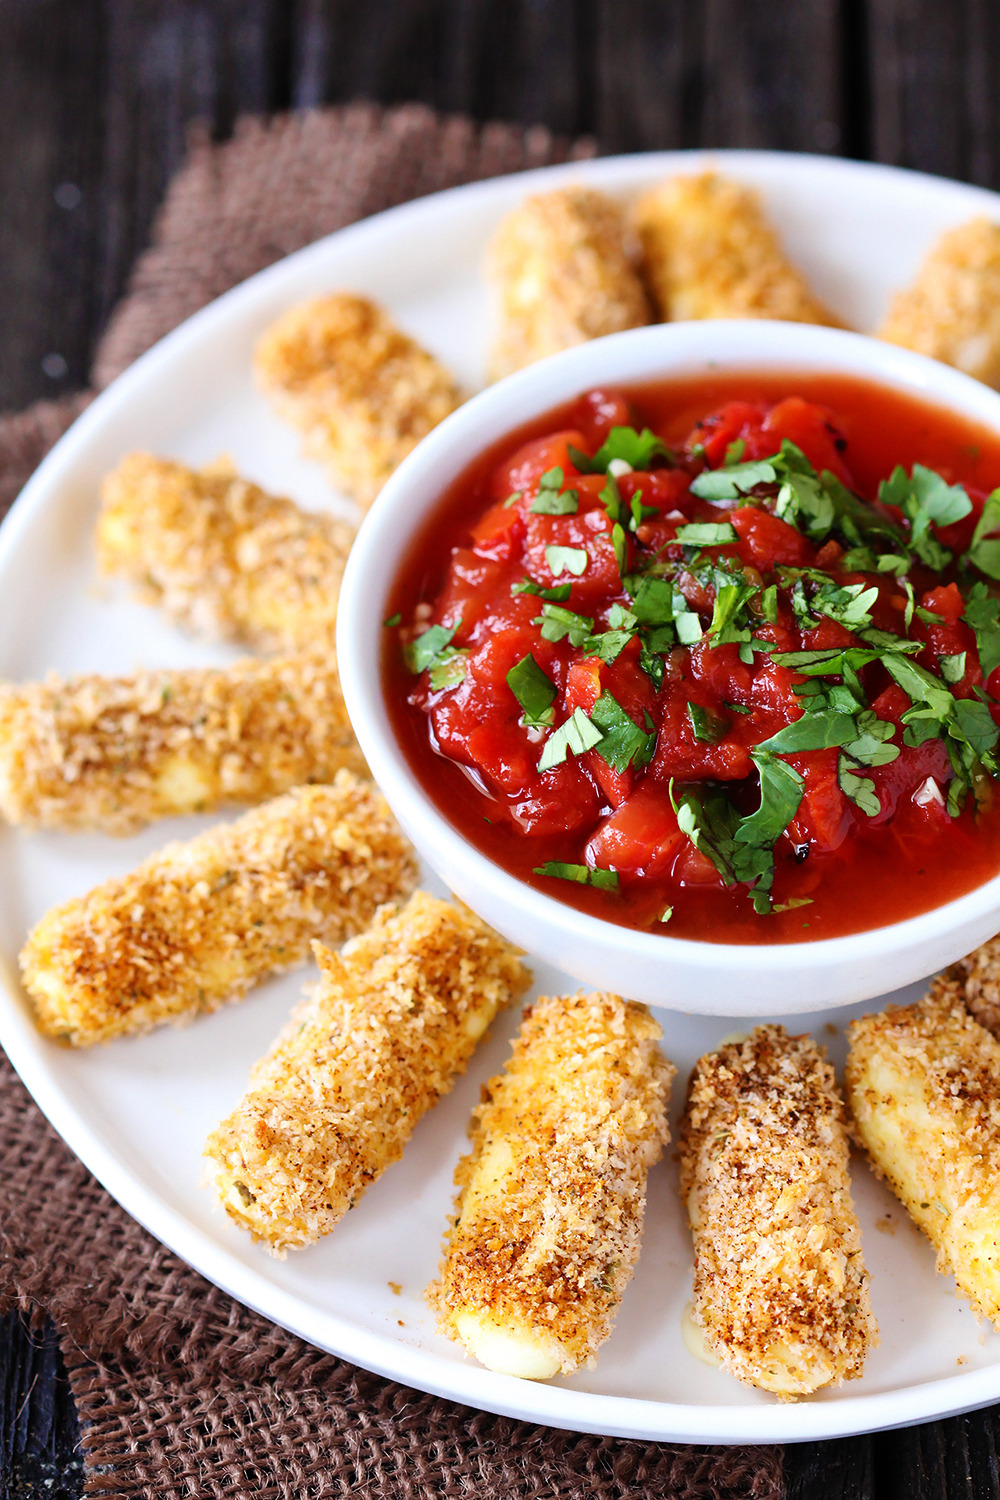 Recipe: Baked Mexican Cheese Sticks with Salsa